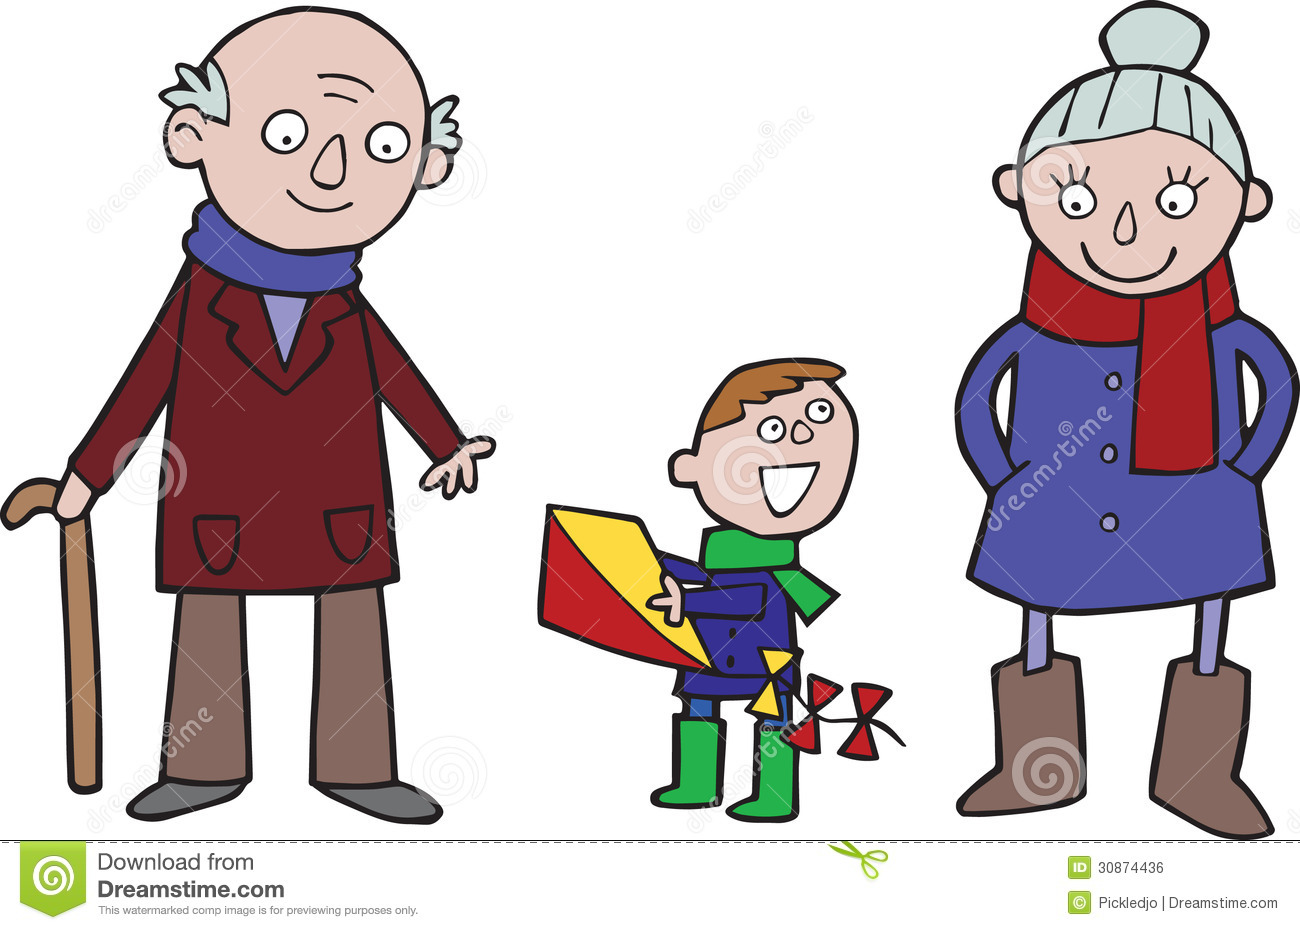 Cartoon Of A Granddad And Grandma Taking Their Grandson Out To Play